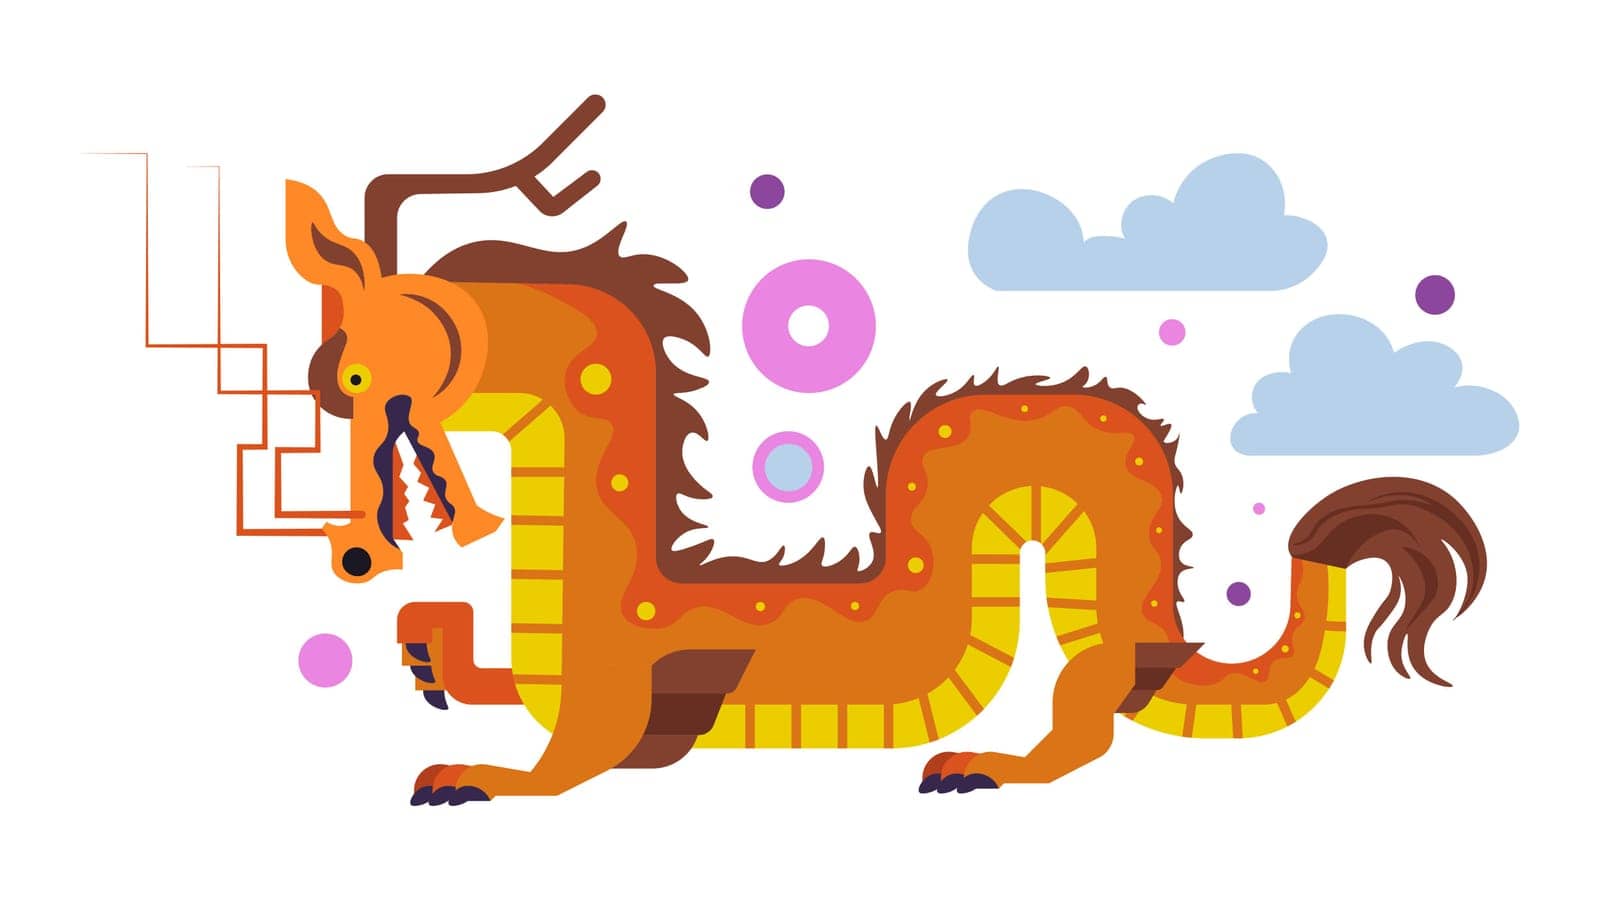 Dragon character with horns and tail, clouds effect. Isolated Chinese mythology or folklore personage, magical animal or creature, reptile from fairy tales, and stories. Vector in flat styles